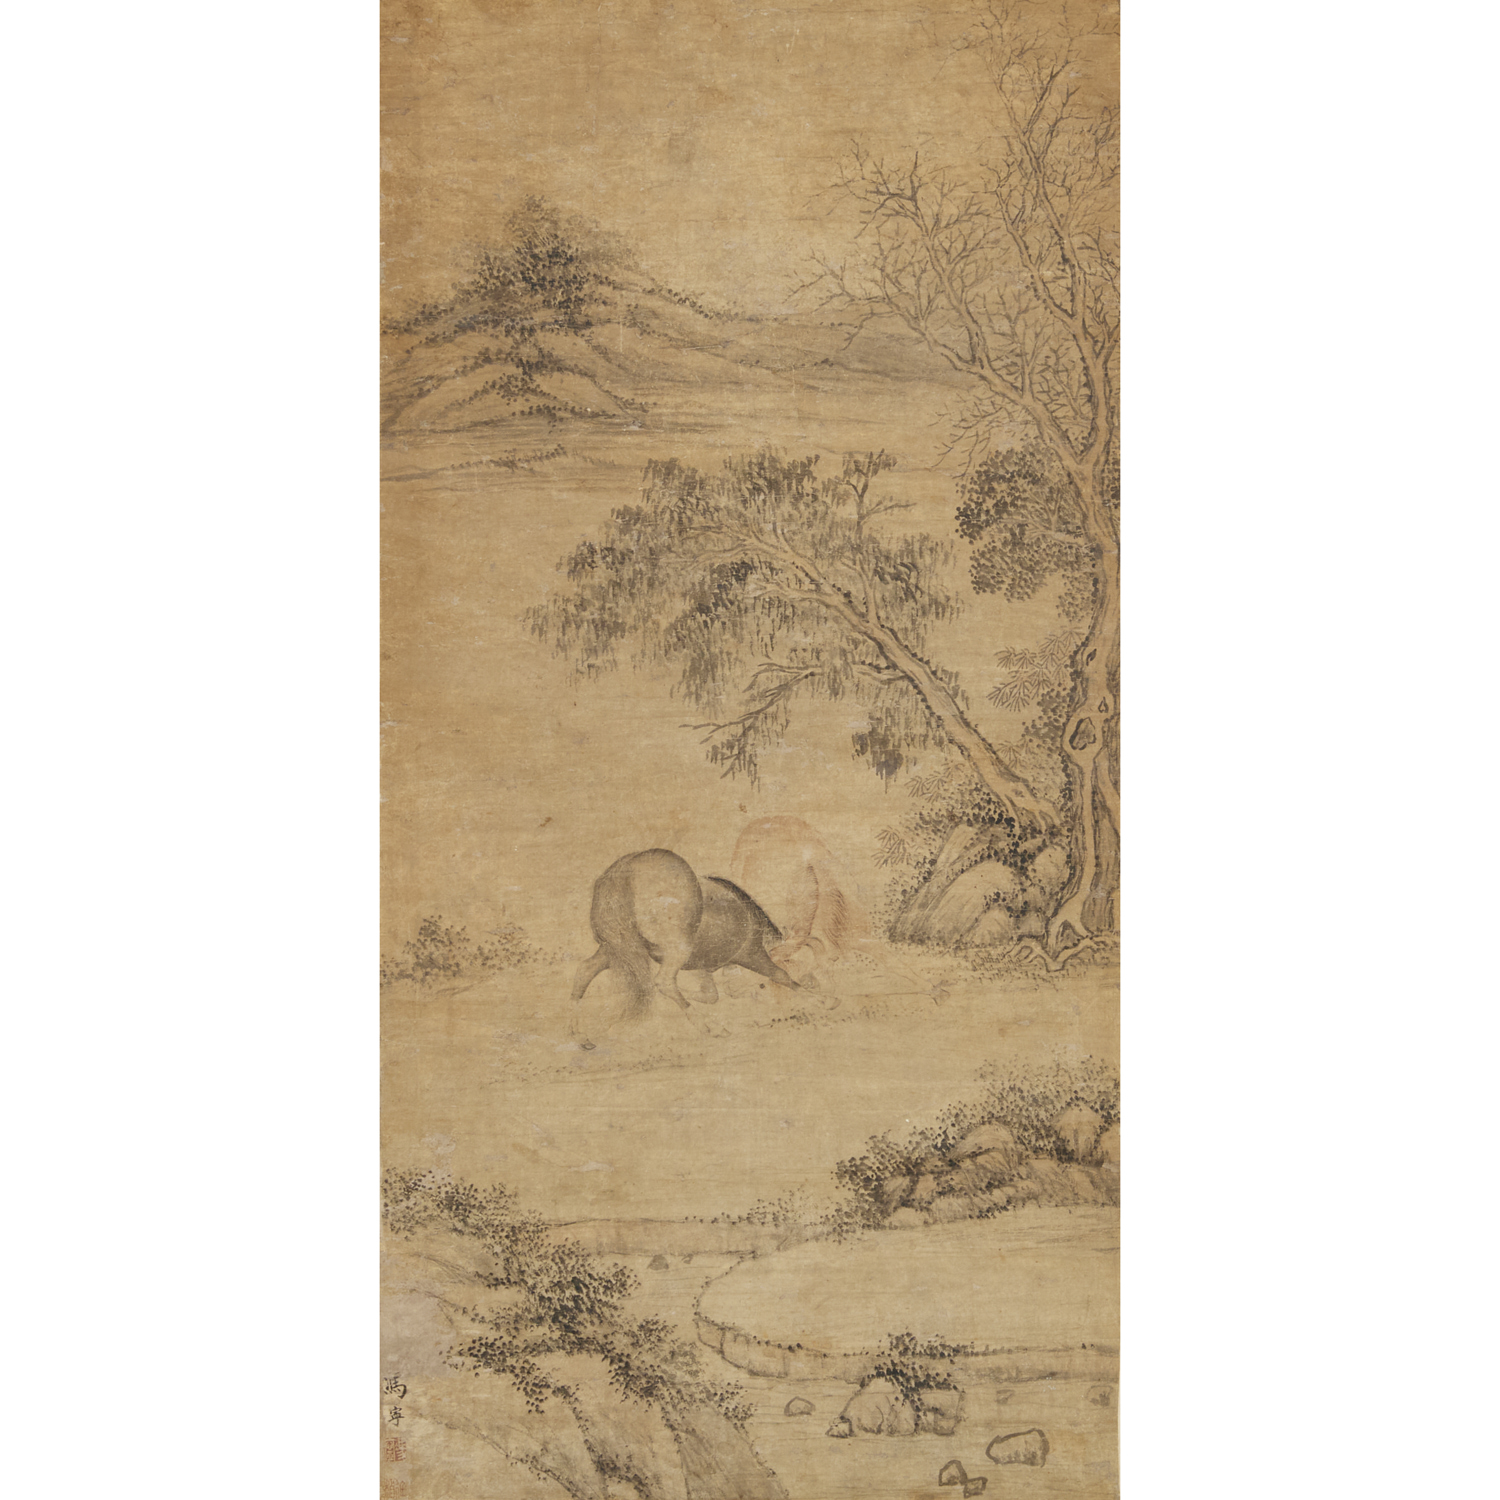 MARK OF FENG NING, SCROLL PAINTING